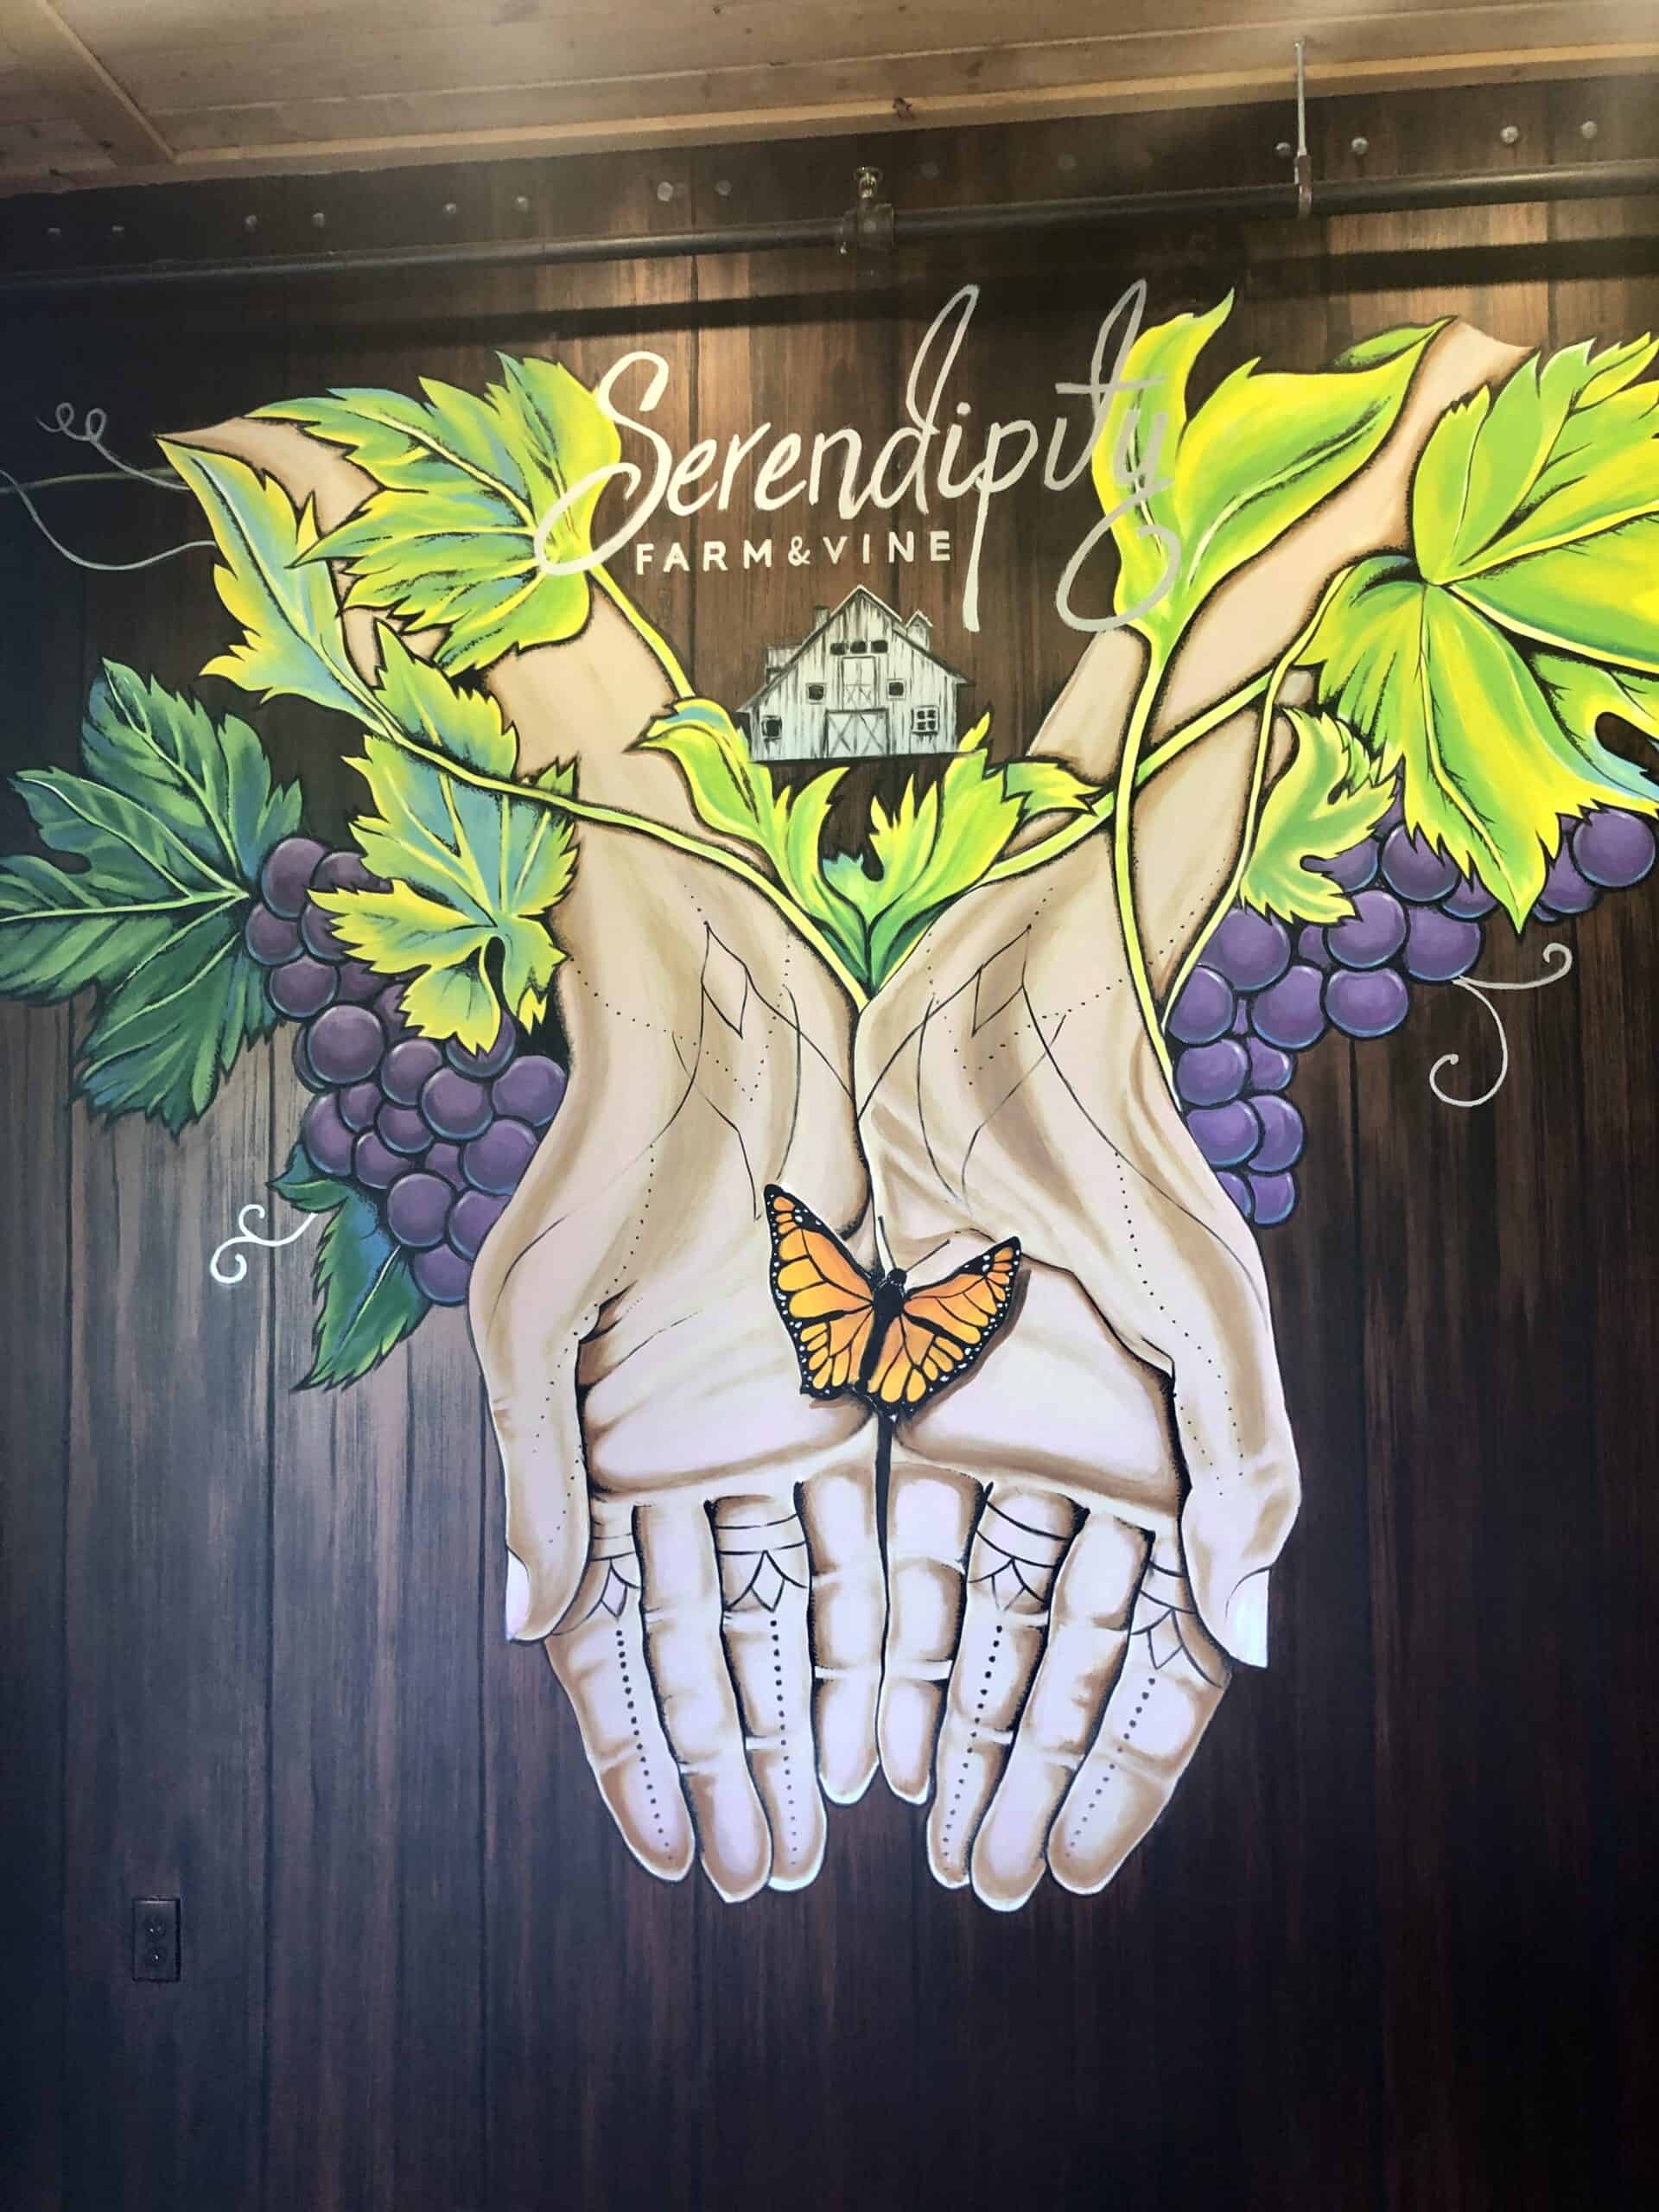 mural of hands holding a butterfly